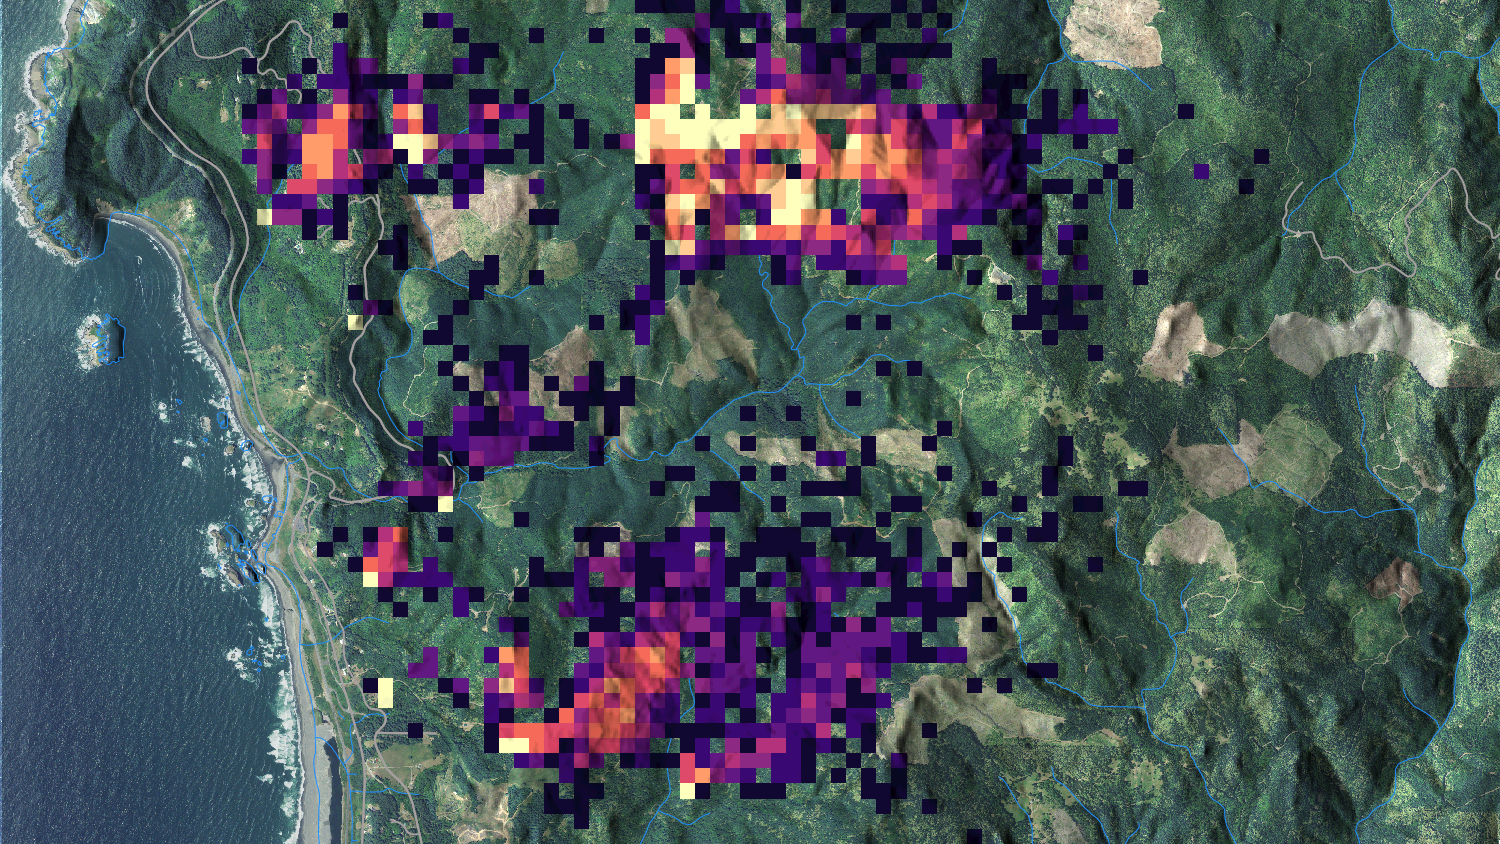 shaded_all_bright_ortho - Center for Geospatial Analytics at NC State University